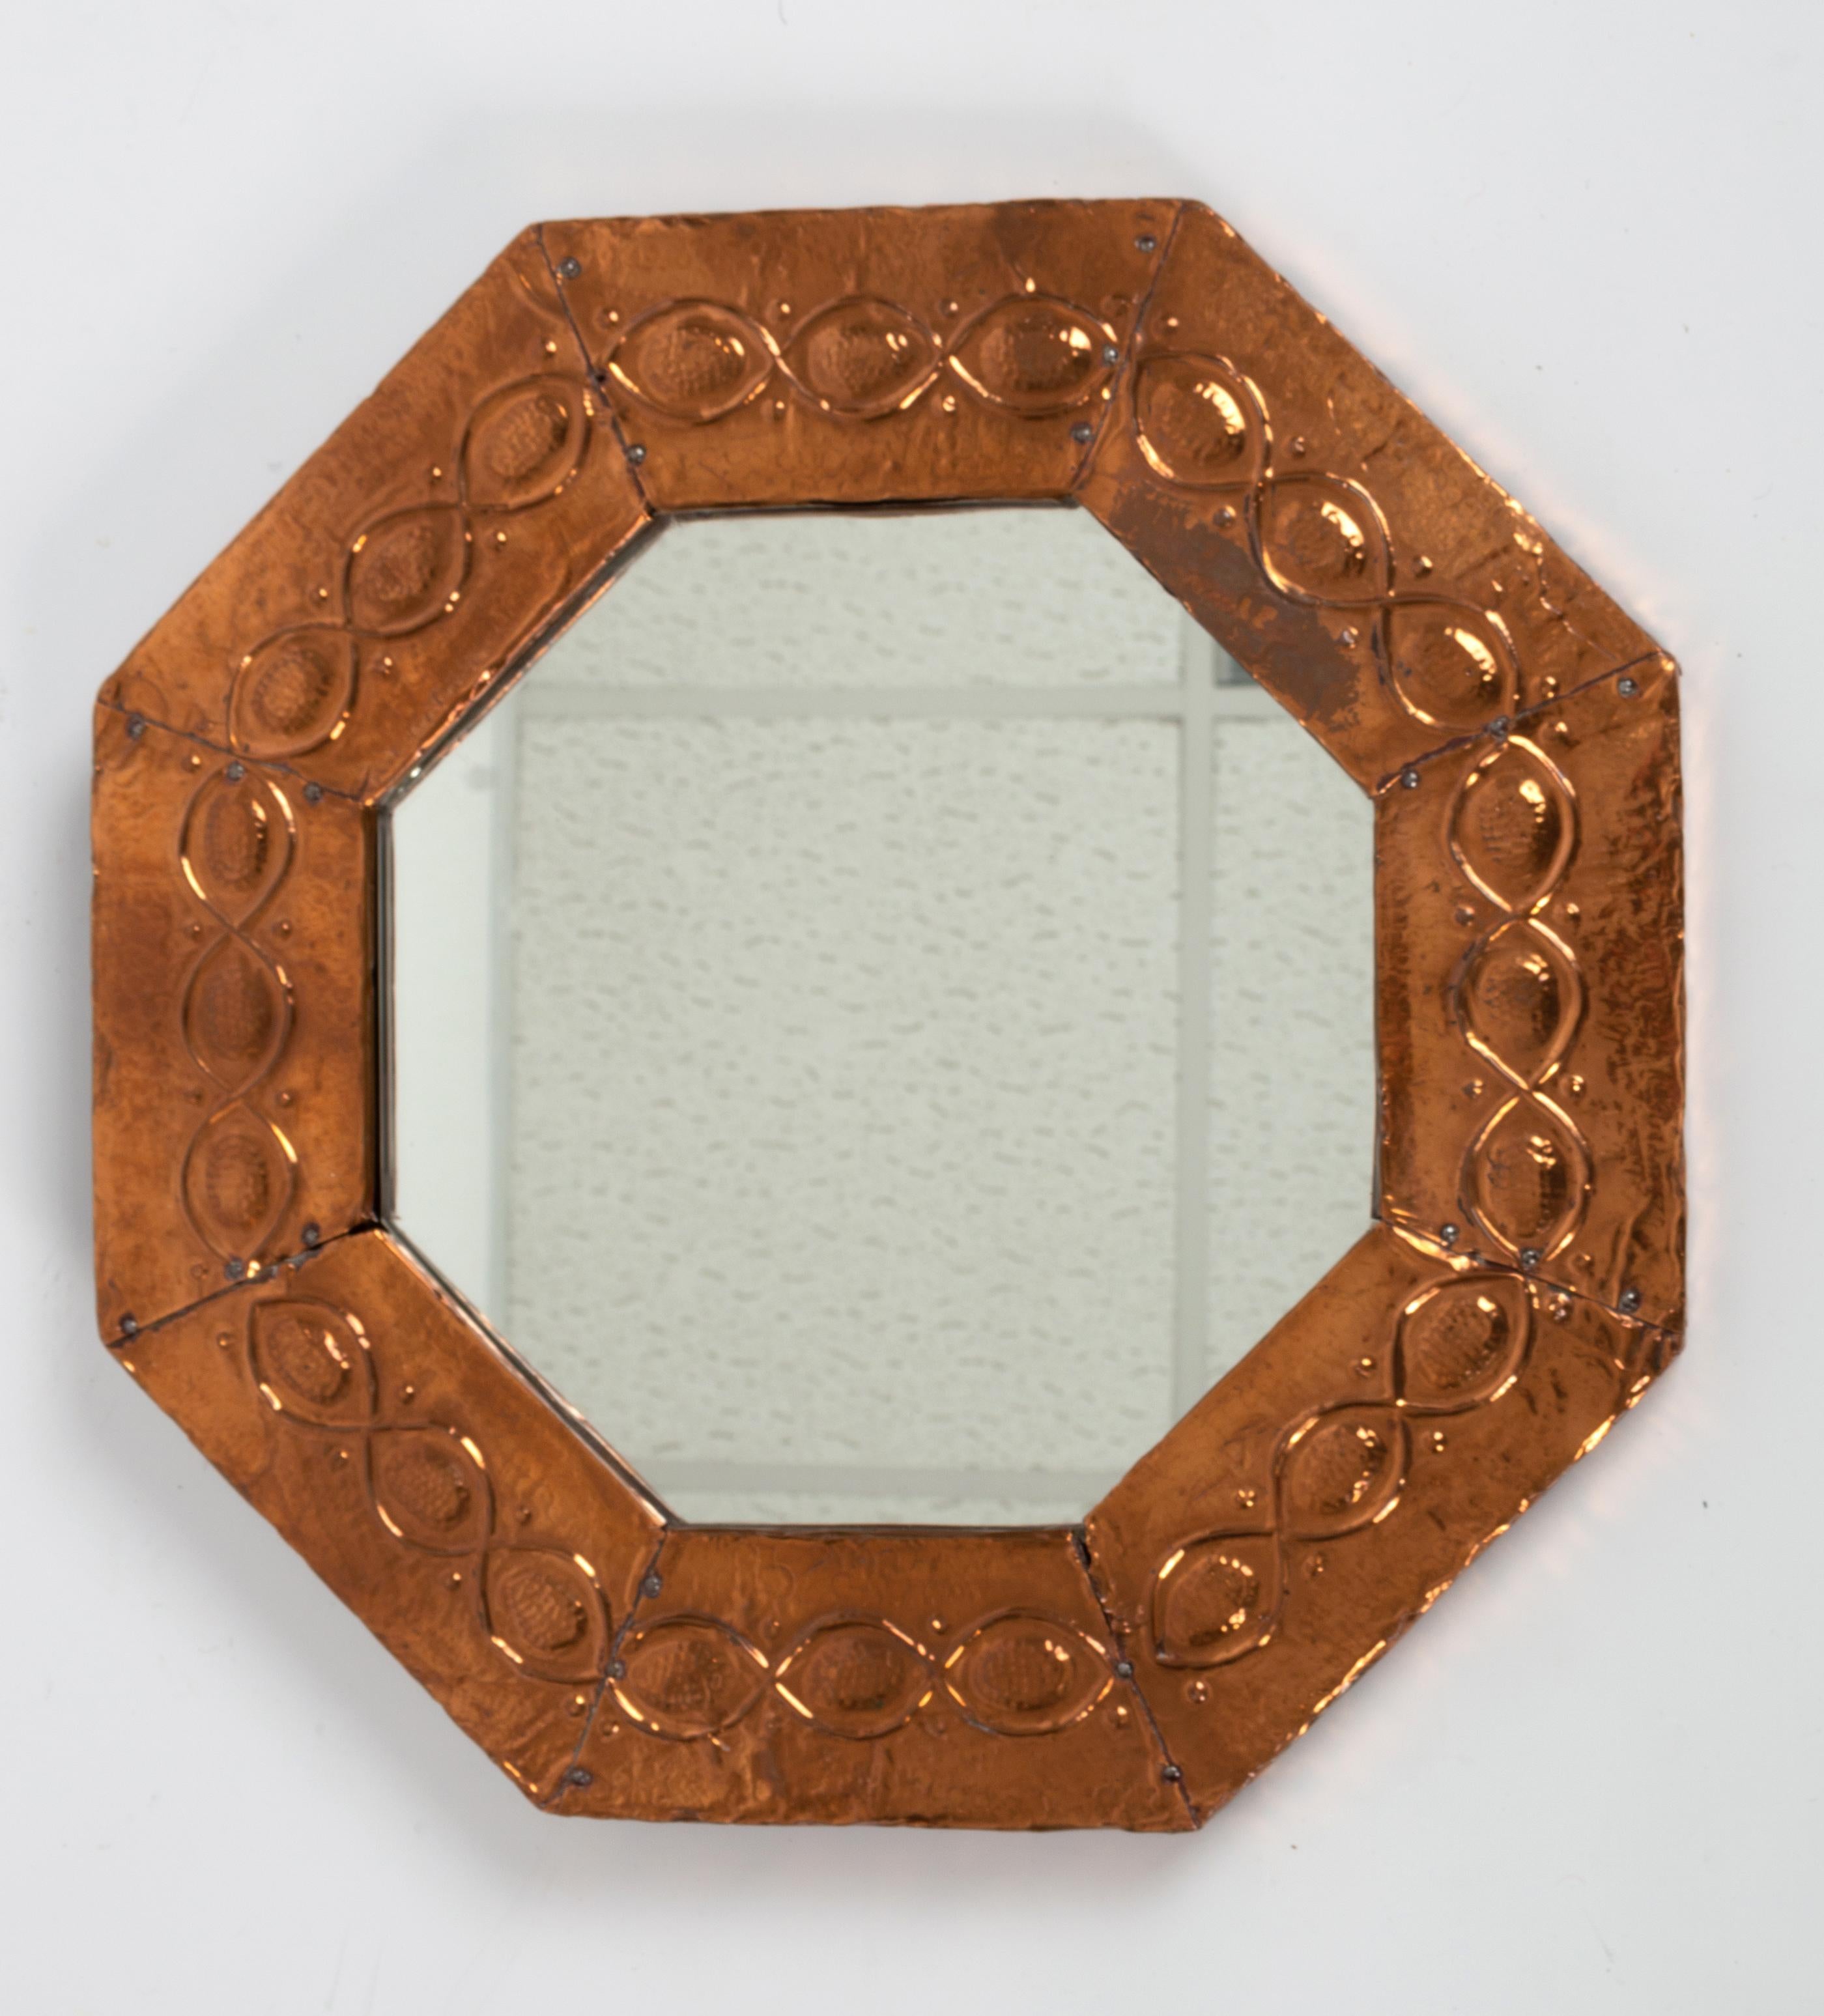 Antique English Arts & Crafts copper octagonal mirror C.1890
Hammered copper.
In excellent condition commensurate with age.